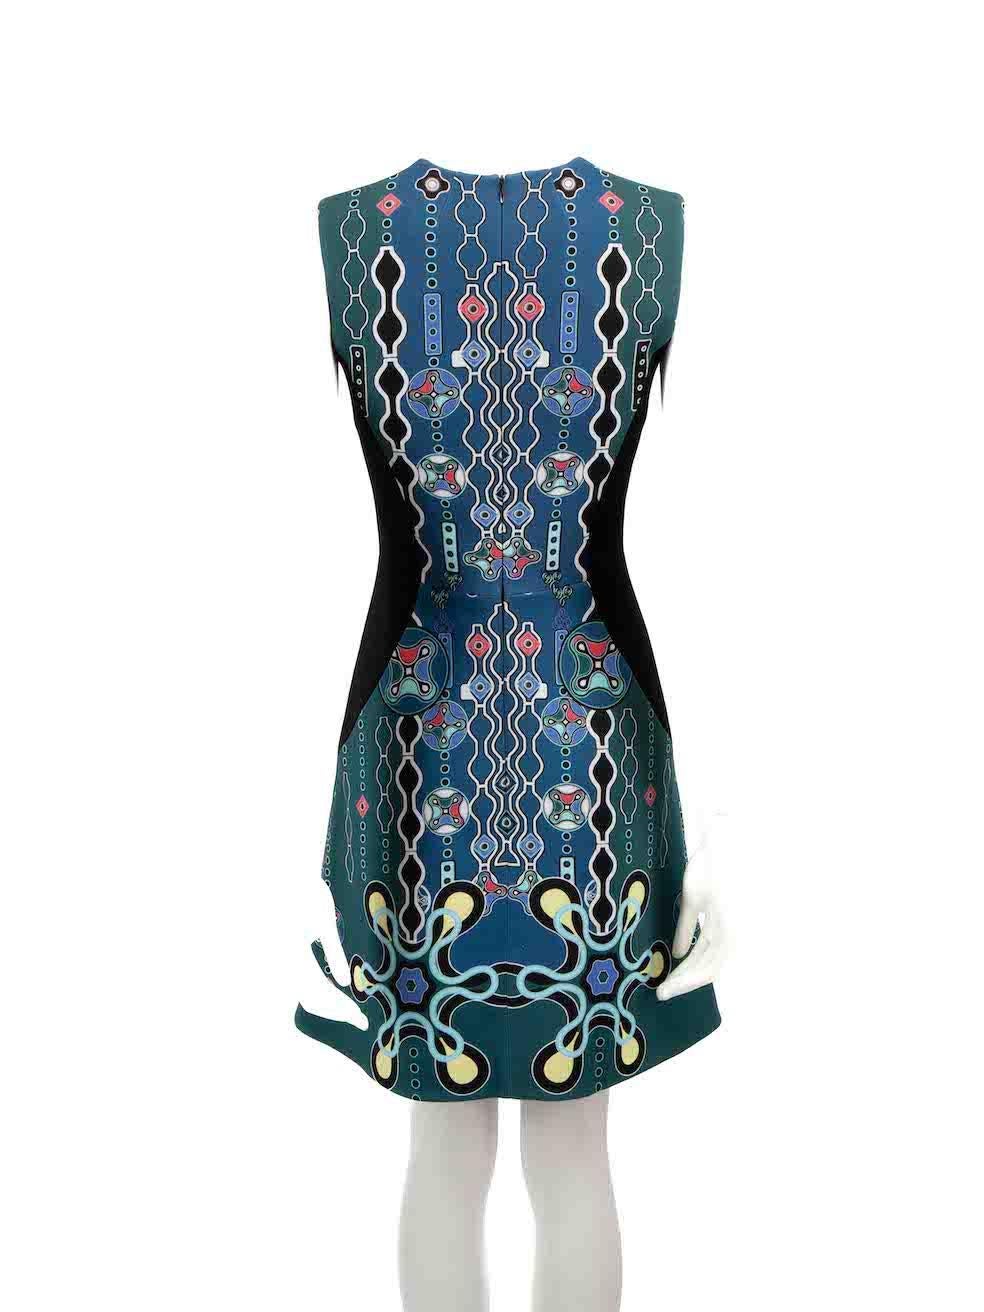 Peter Pilotto Blue Abstract Knee Length Dress Size S In Good Condition For Sale In London, GB